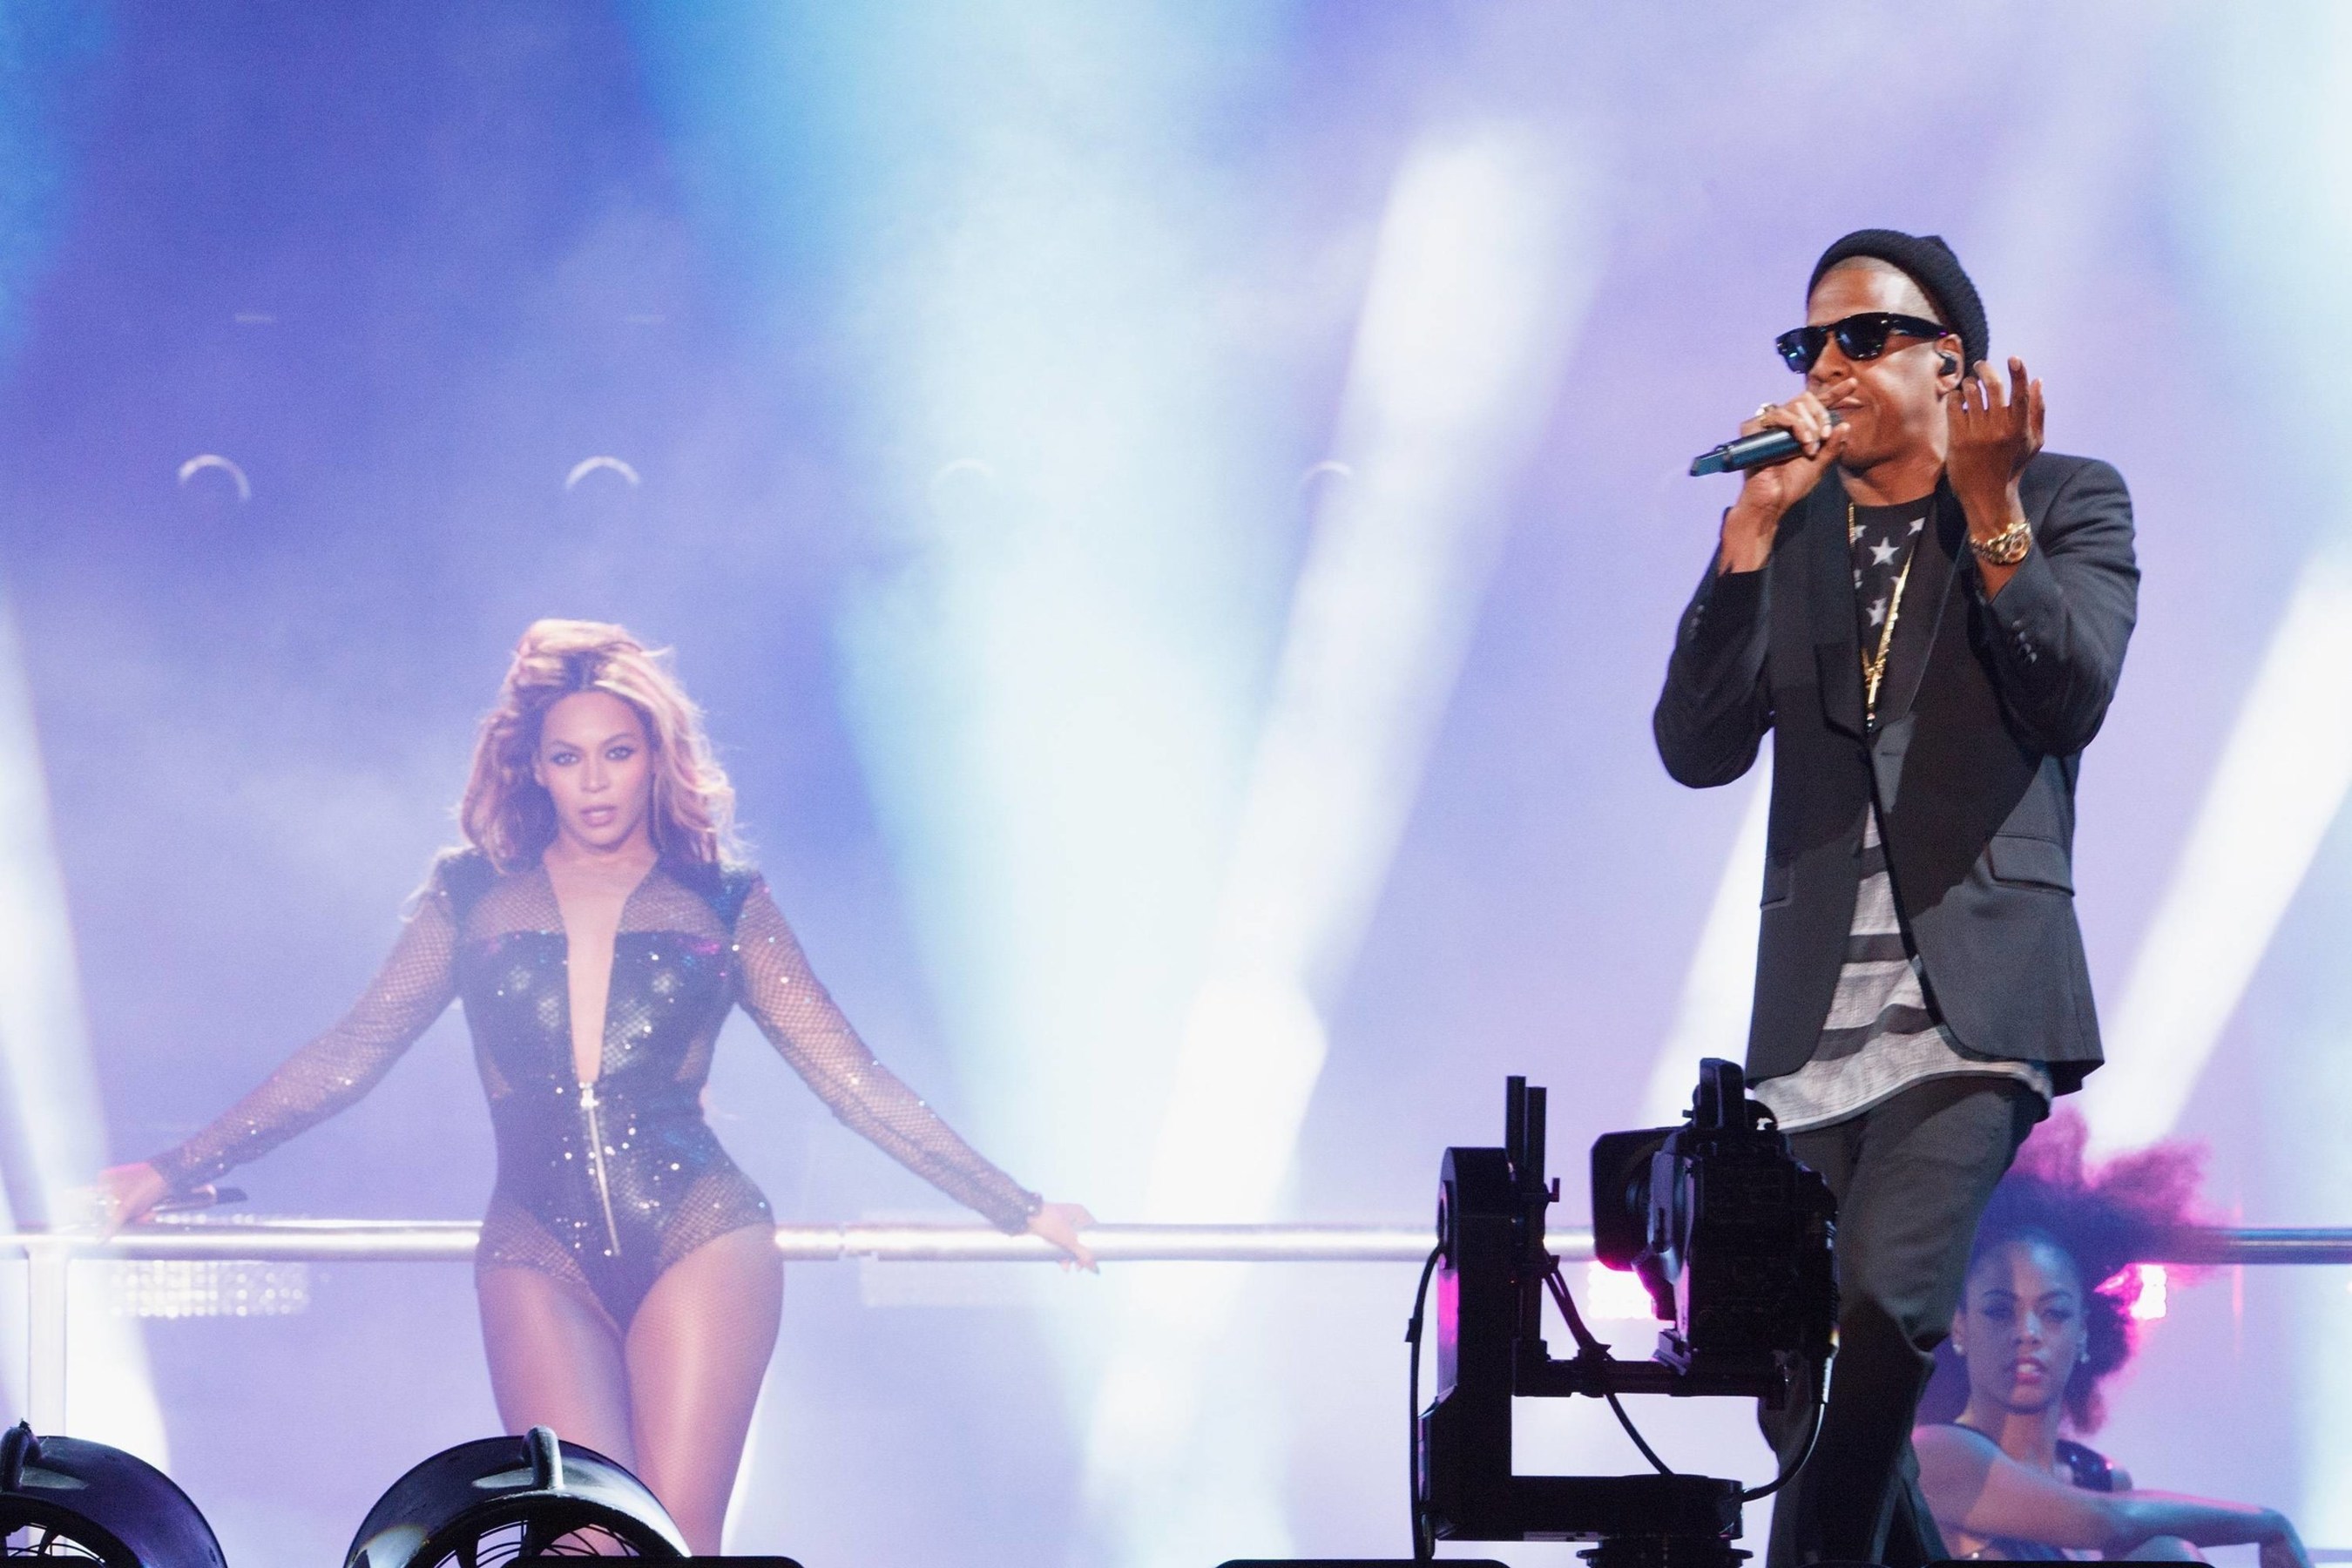 BEYONCE & JAY Z "ON THE RUN TOUR" EXCLUSIVELY IN PARIS FOR TWO FINAL SHOWS. (PRNewsFoto/Live Nation Entertainment)